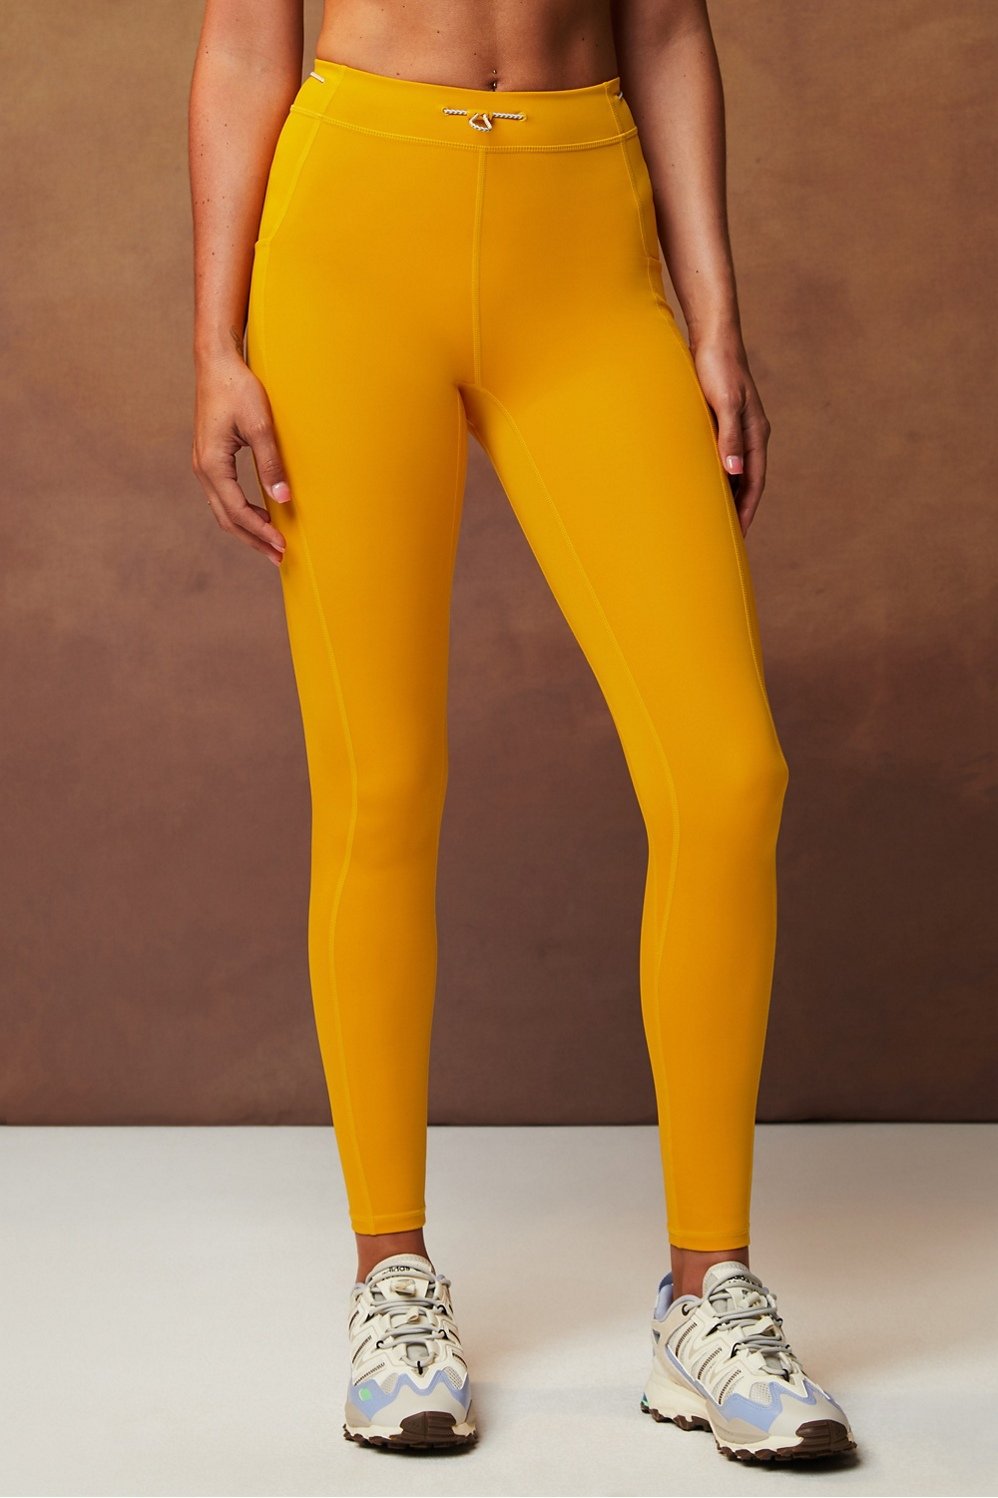 Yellow high waisted peach leggings for fitness and yoga